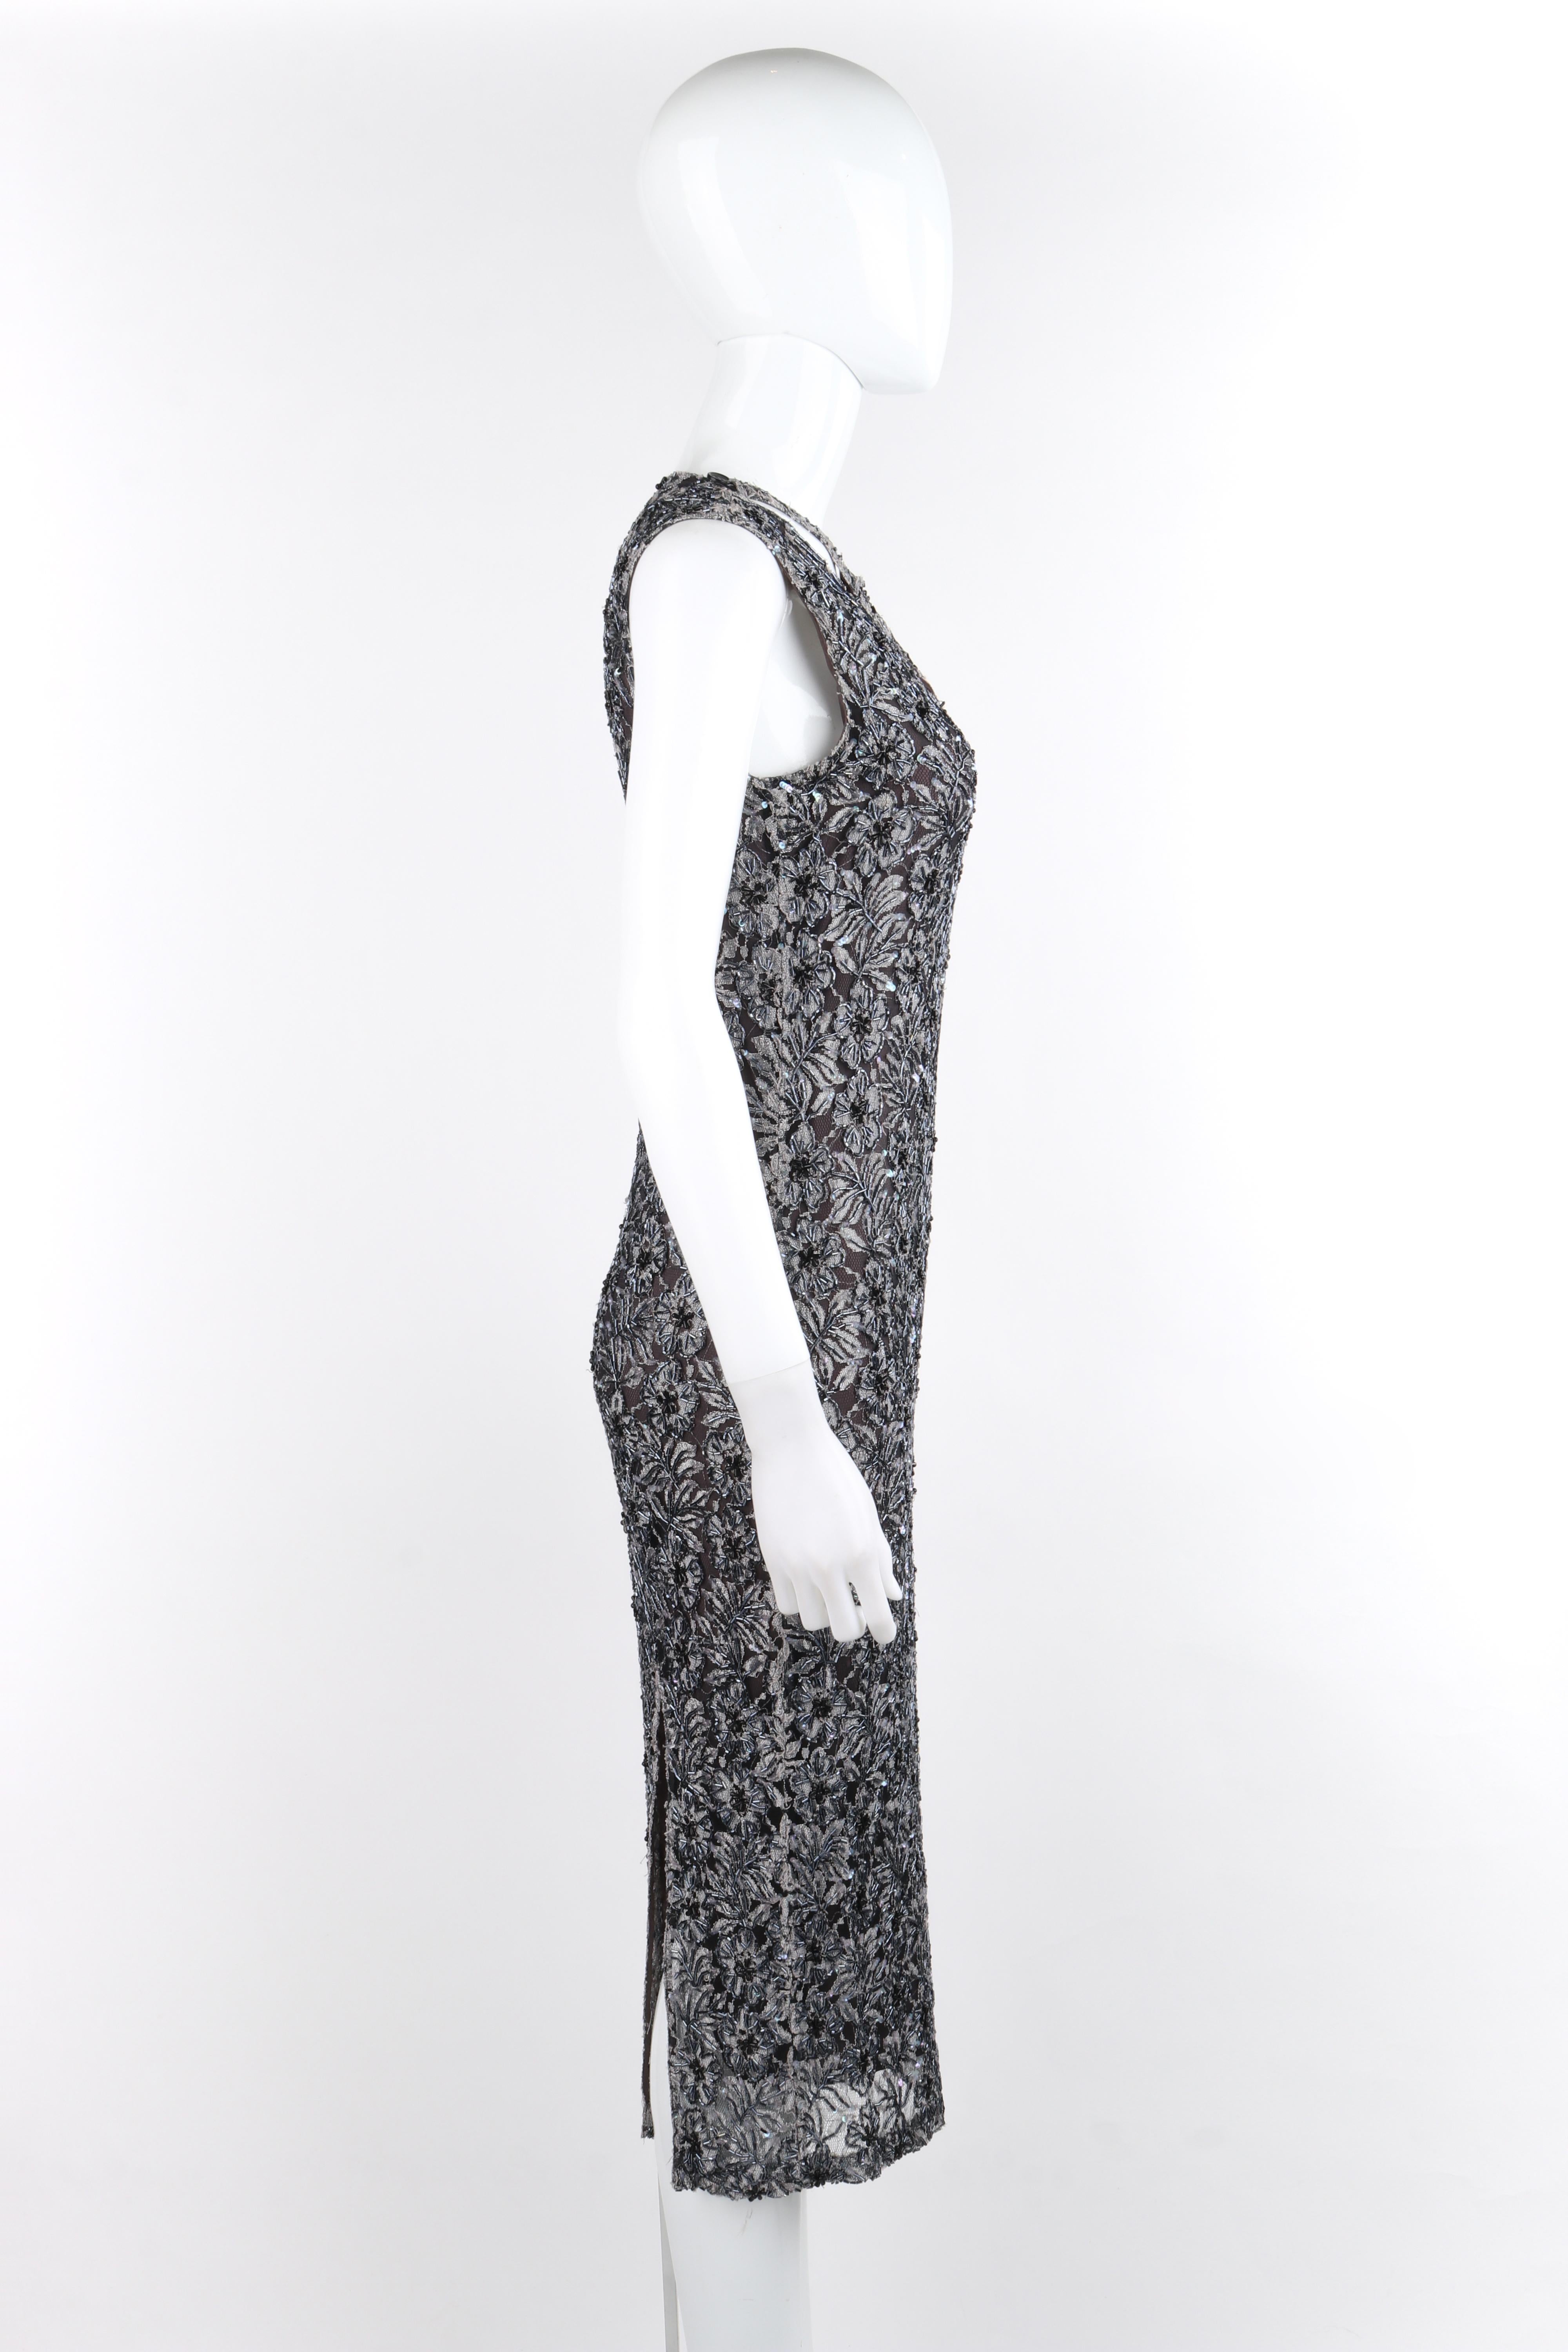 ALEXANDER McQUEEN c.1999 Vtg Grey Sequin Beaded Lace Embellished Cutout Dress For Sale 1